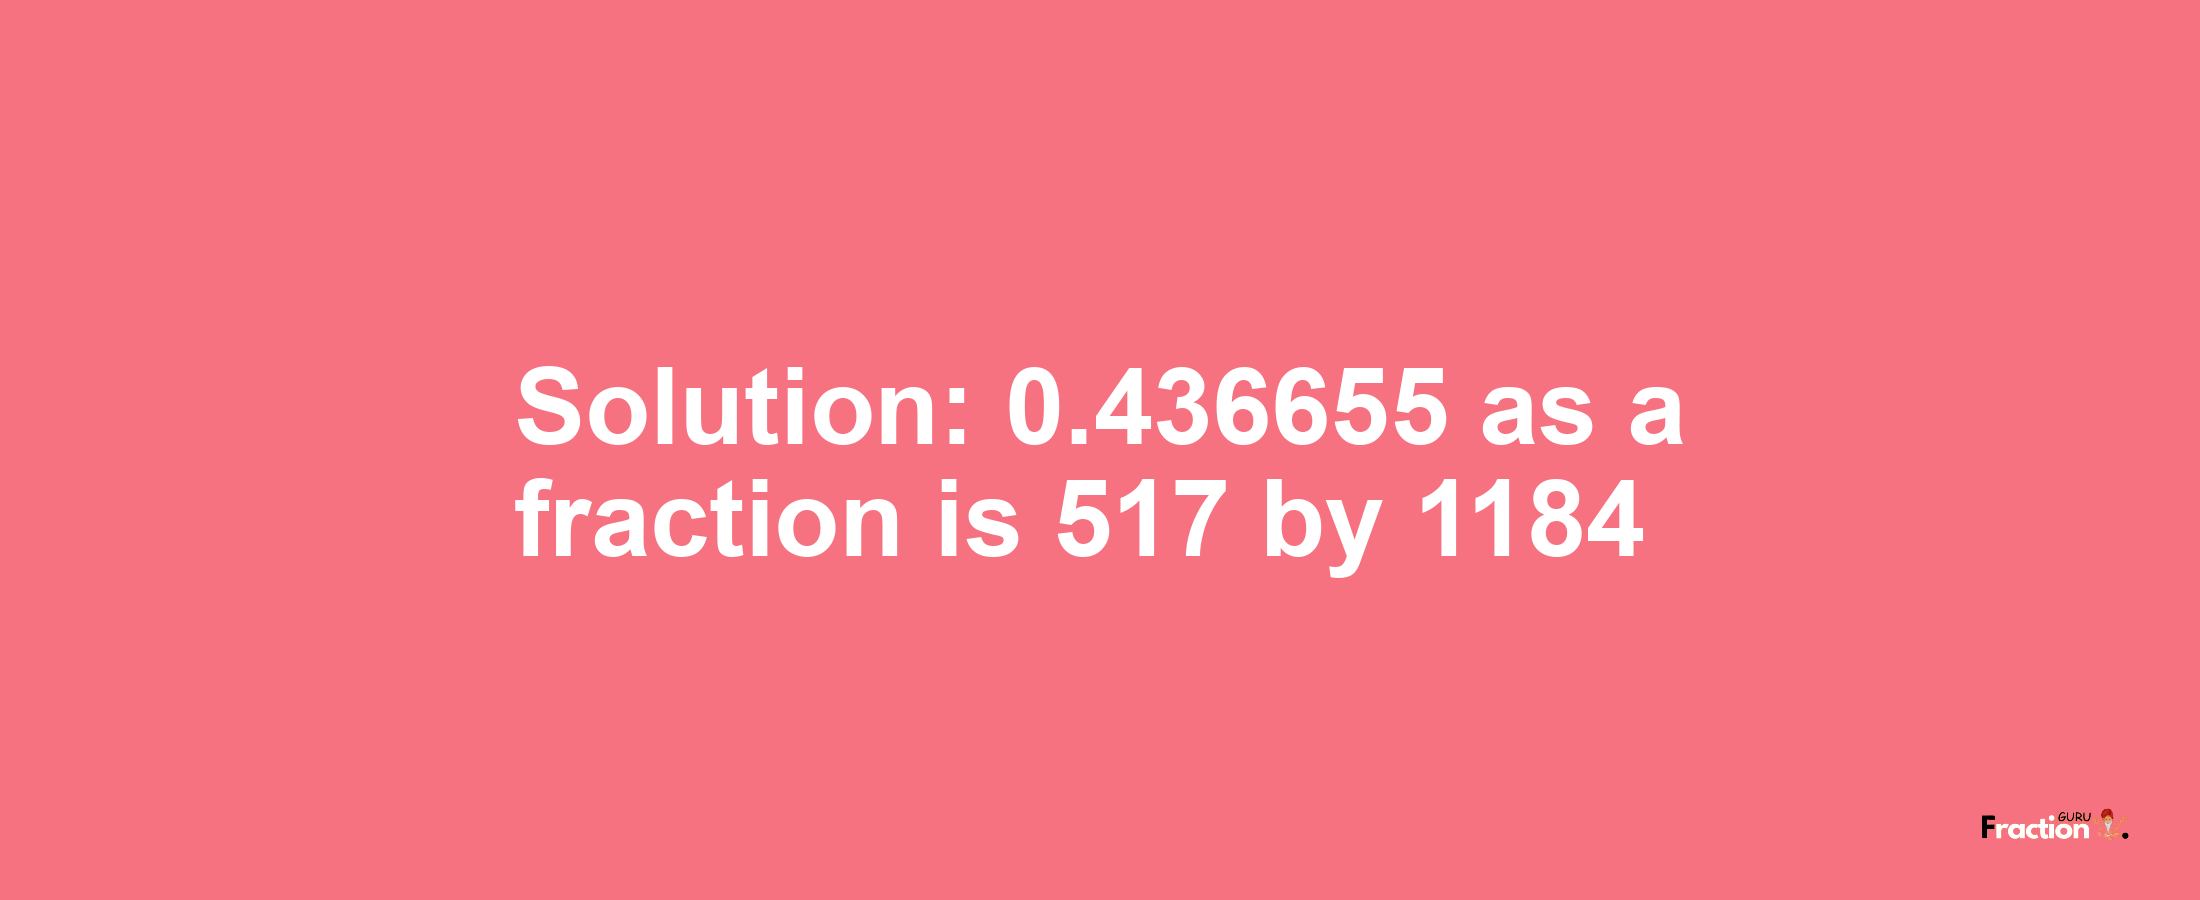 Solution:0.436655 as a fraction is 517/1184